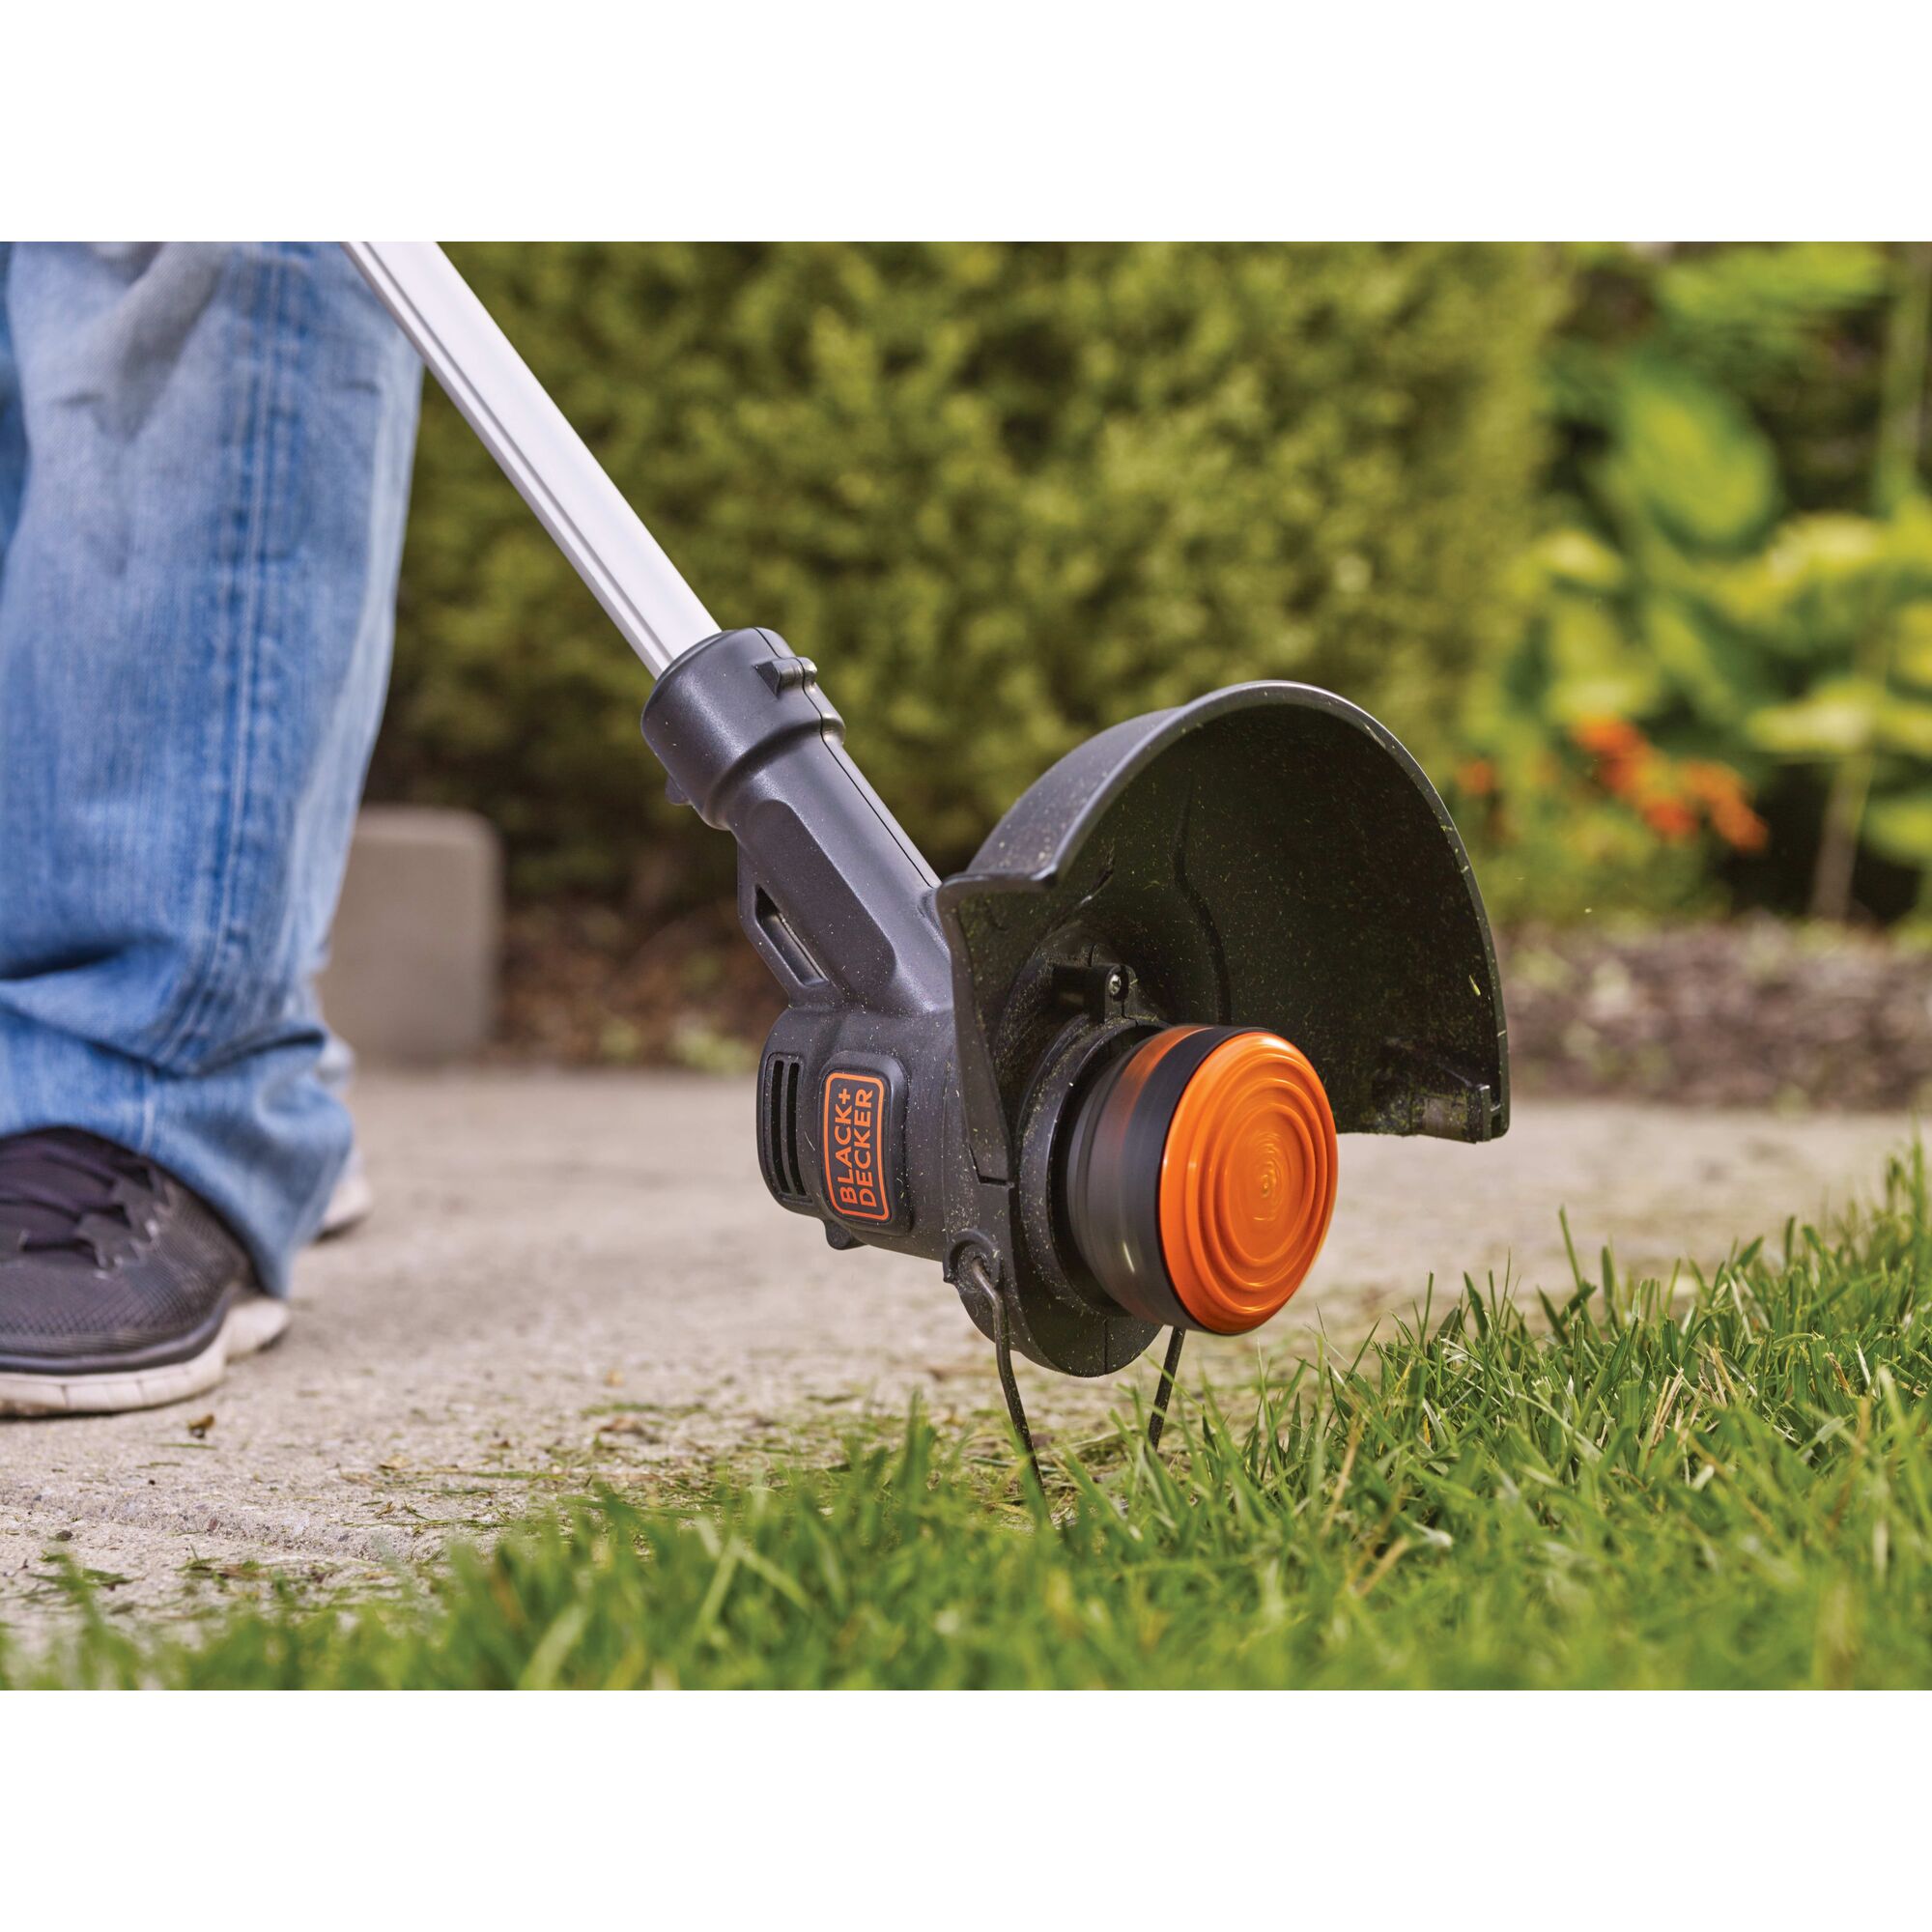 Close-up of the 20V Max Lithium 10 In. String Trimmer / Edger being used as an edger along a sidewalk.